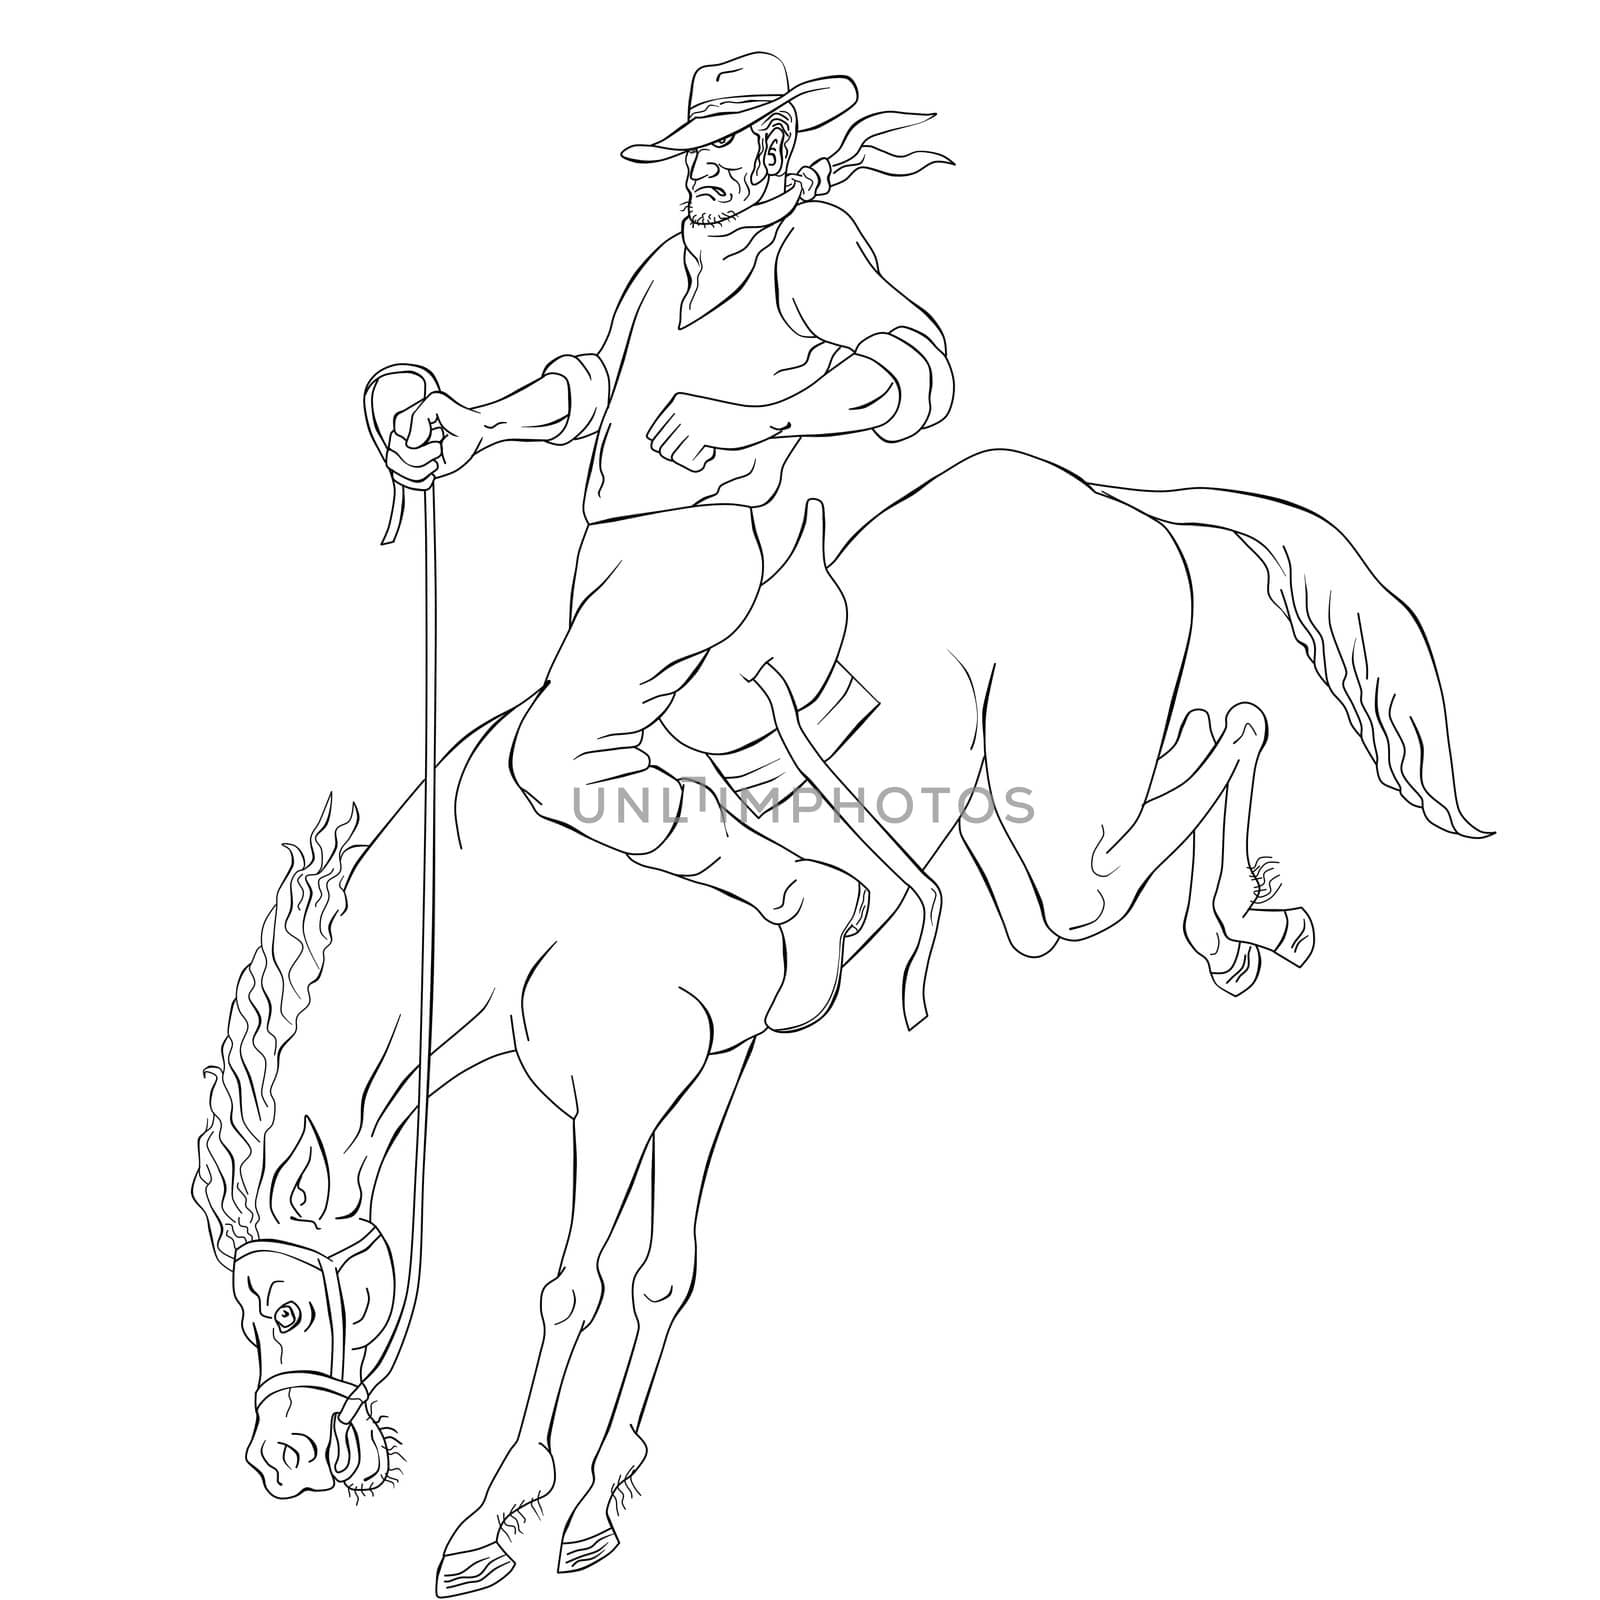 illustration of rodeo cowboy riding bucking horse bronco on isolated white background done in black and white cartoon style